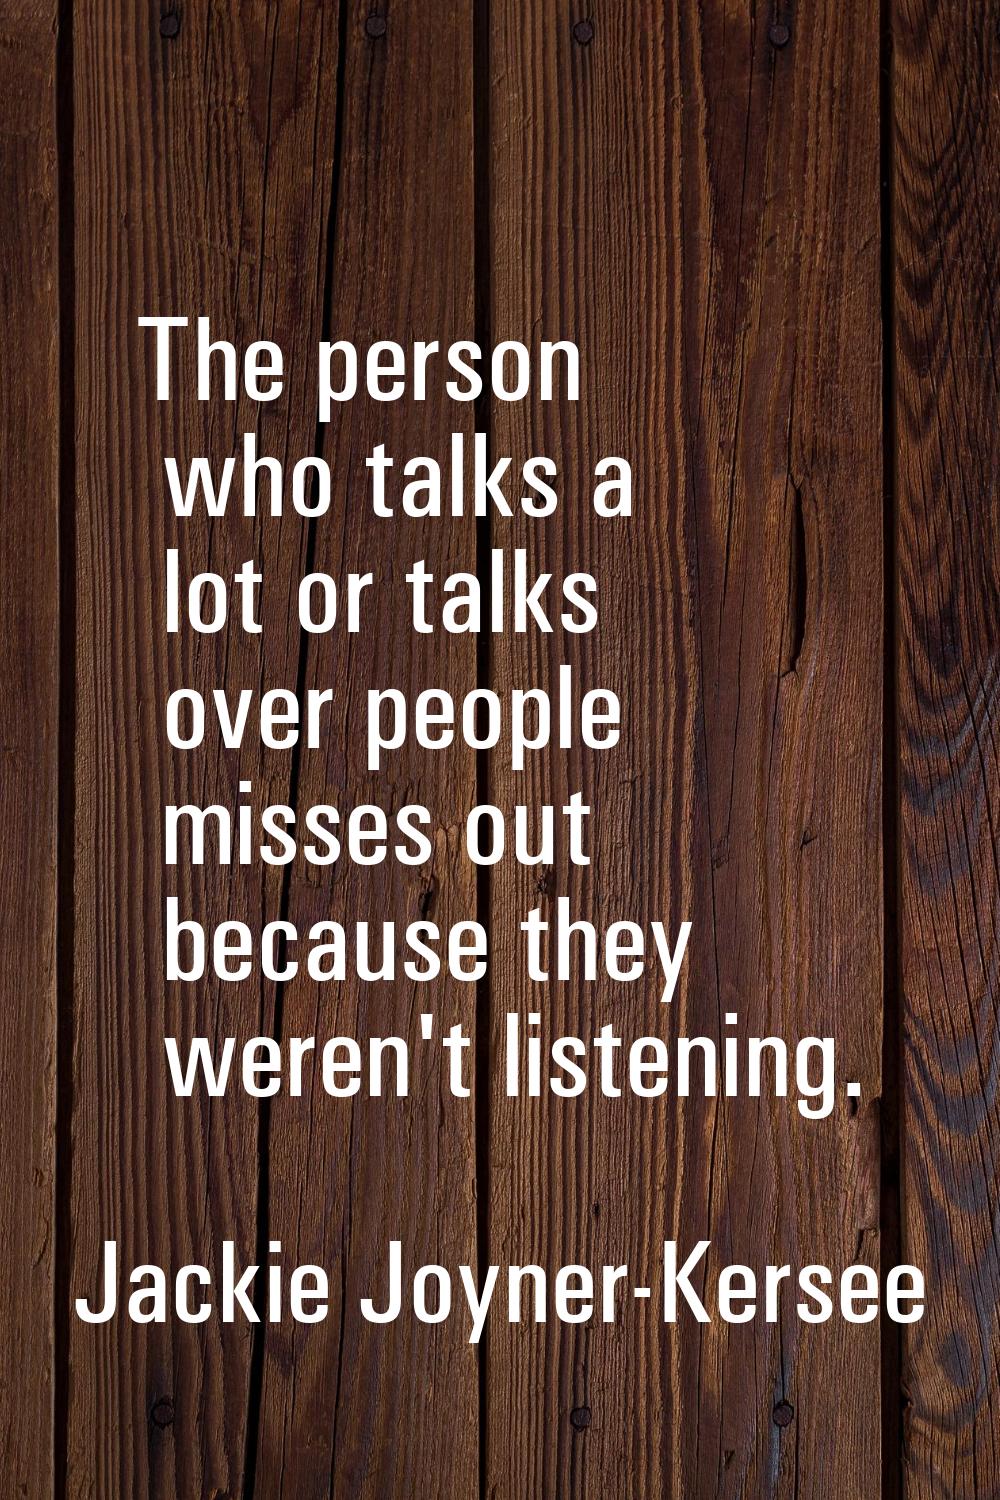 The person who talks a lot or talks over people misses out because they weren't listening.